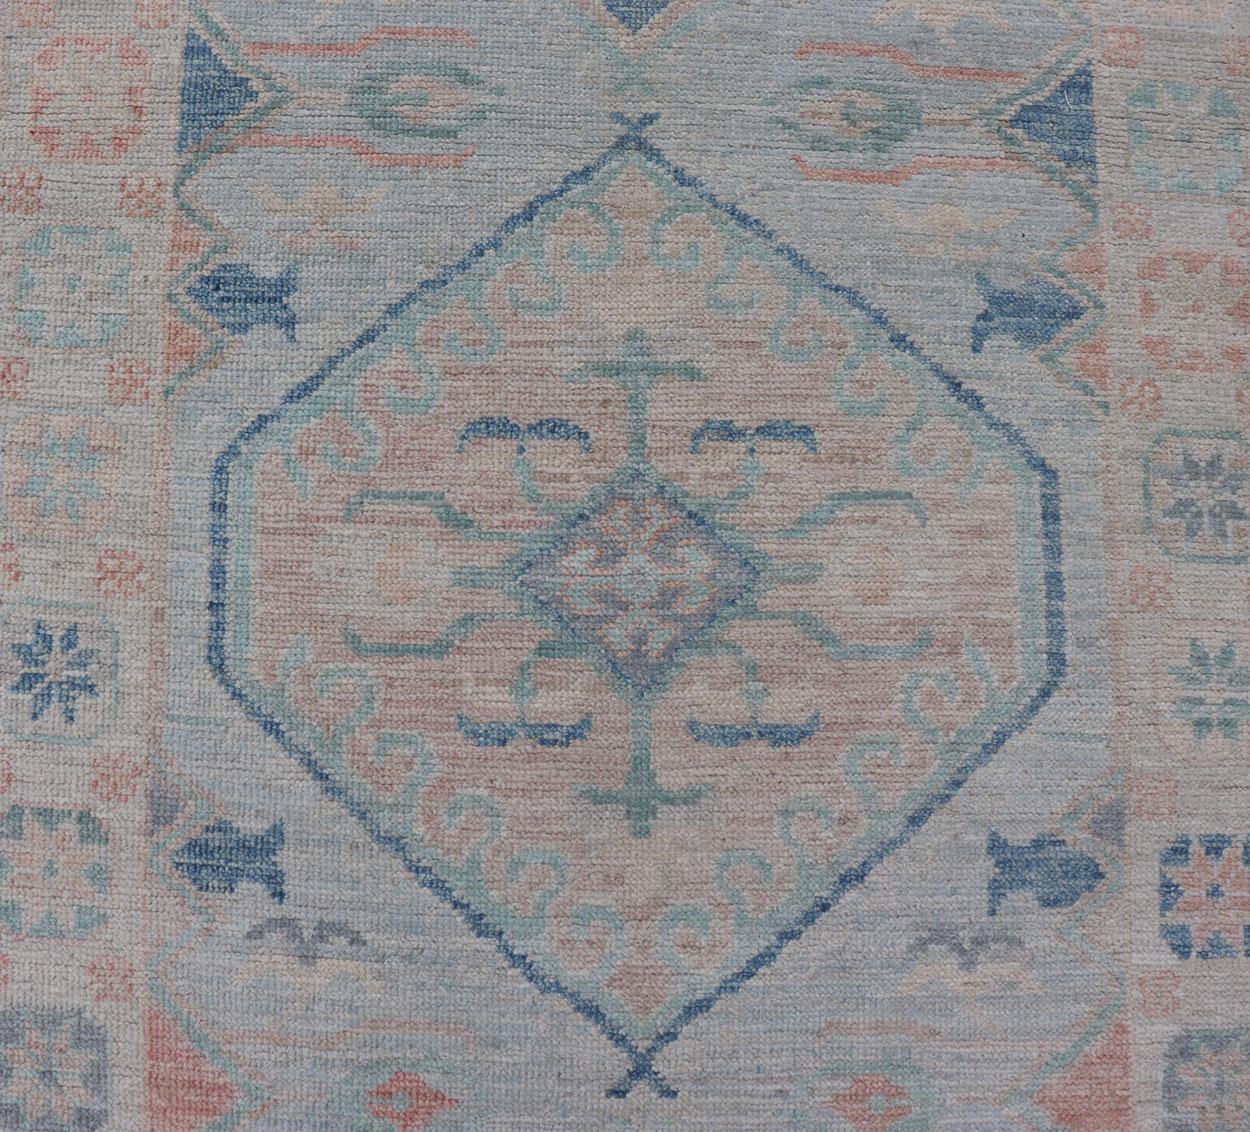 Measures: 2'10 x 9'10 
Modern Oushak Medallion Design Runner With Light Blue Color With Muted Colors. Keivan Woven Arts; rug AWR-12848 / Country of Origin: Afghanistan  Type: Oushak  Circa 2020-  Key Words: Medallion Oushak Runner. 

This runner